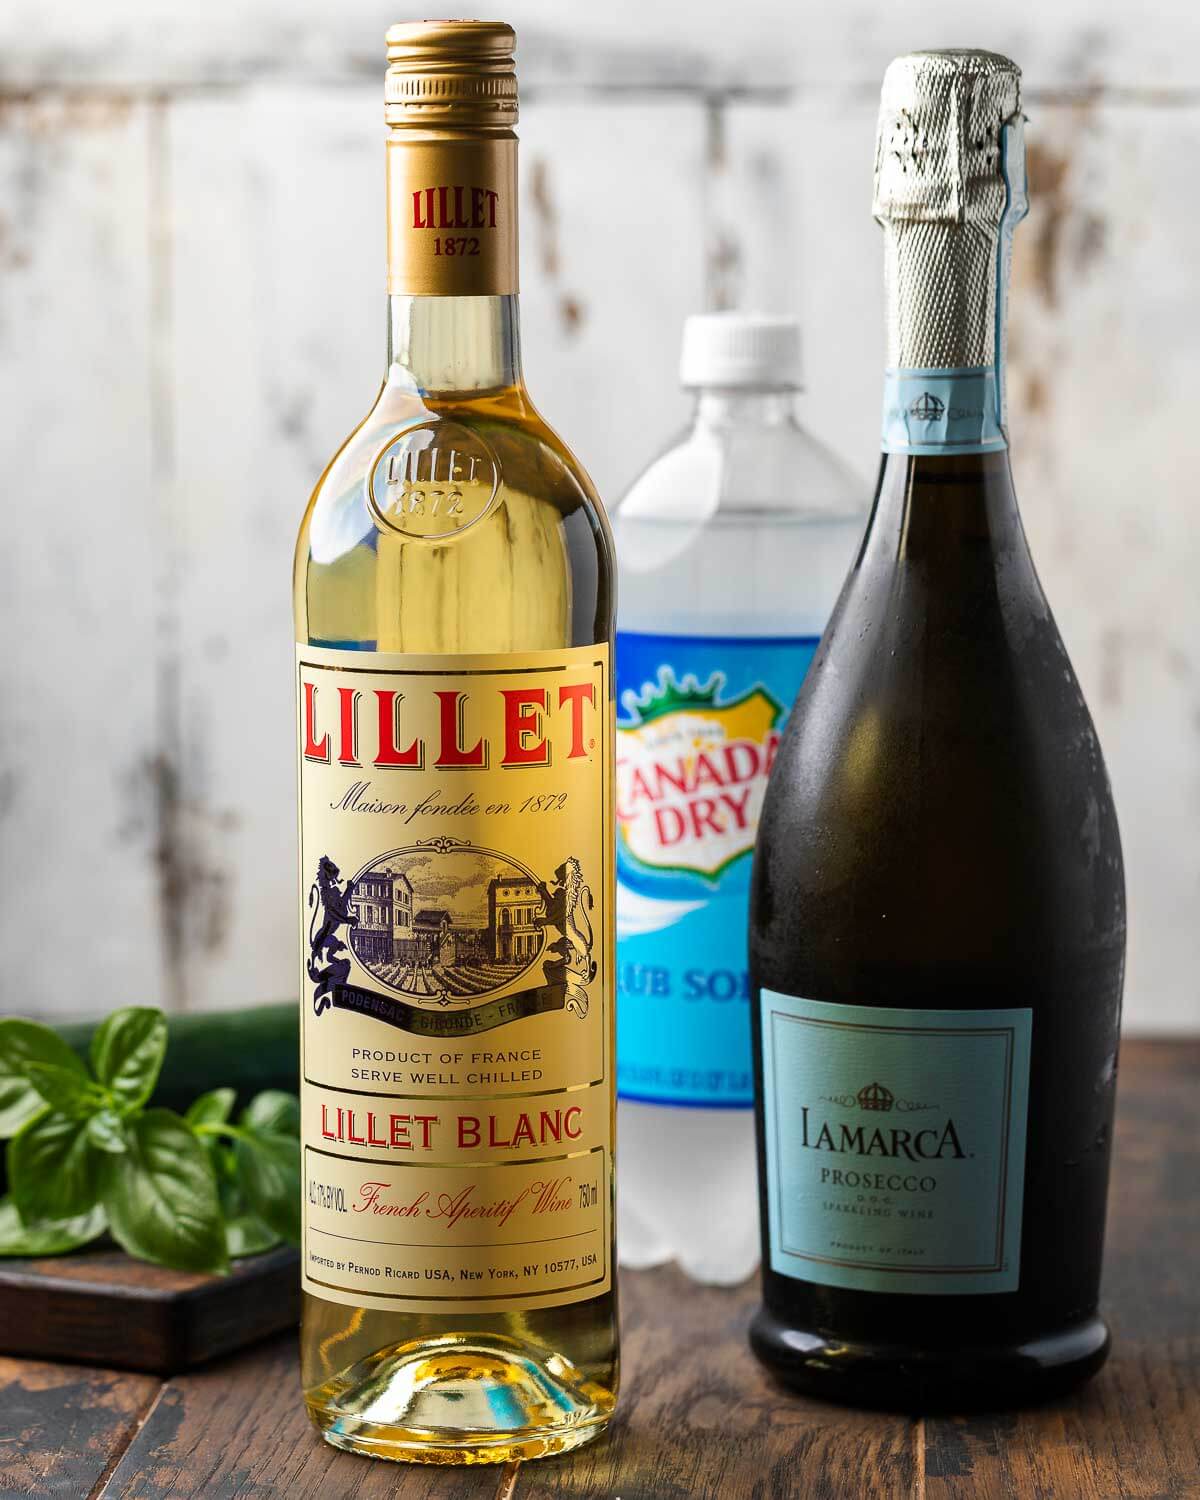 Ingredients shown: Lillet blanc, prosecco, club soda, basil, and cucumber.